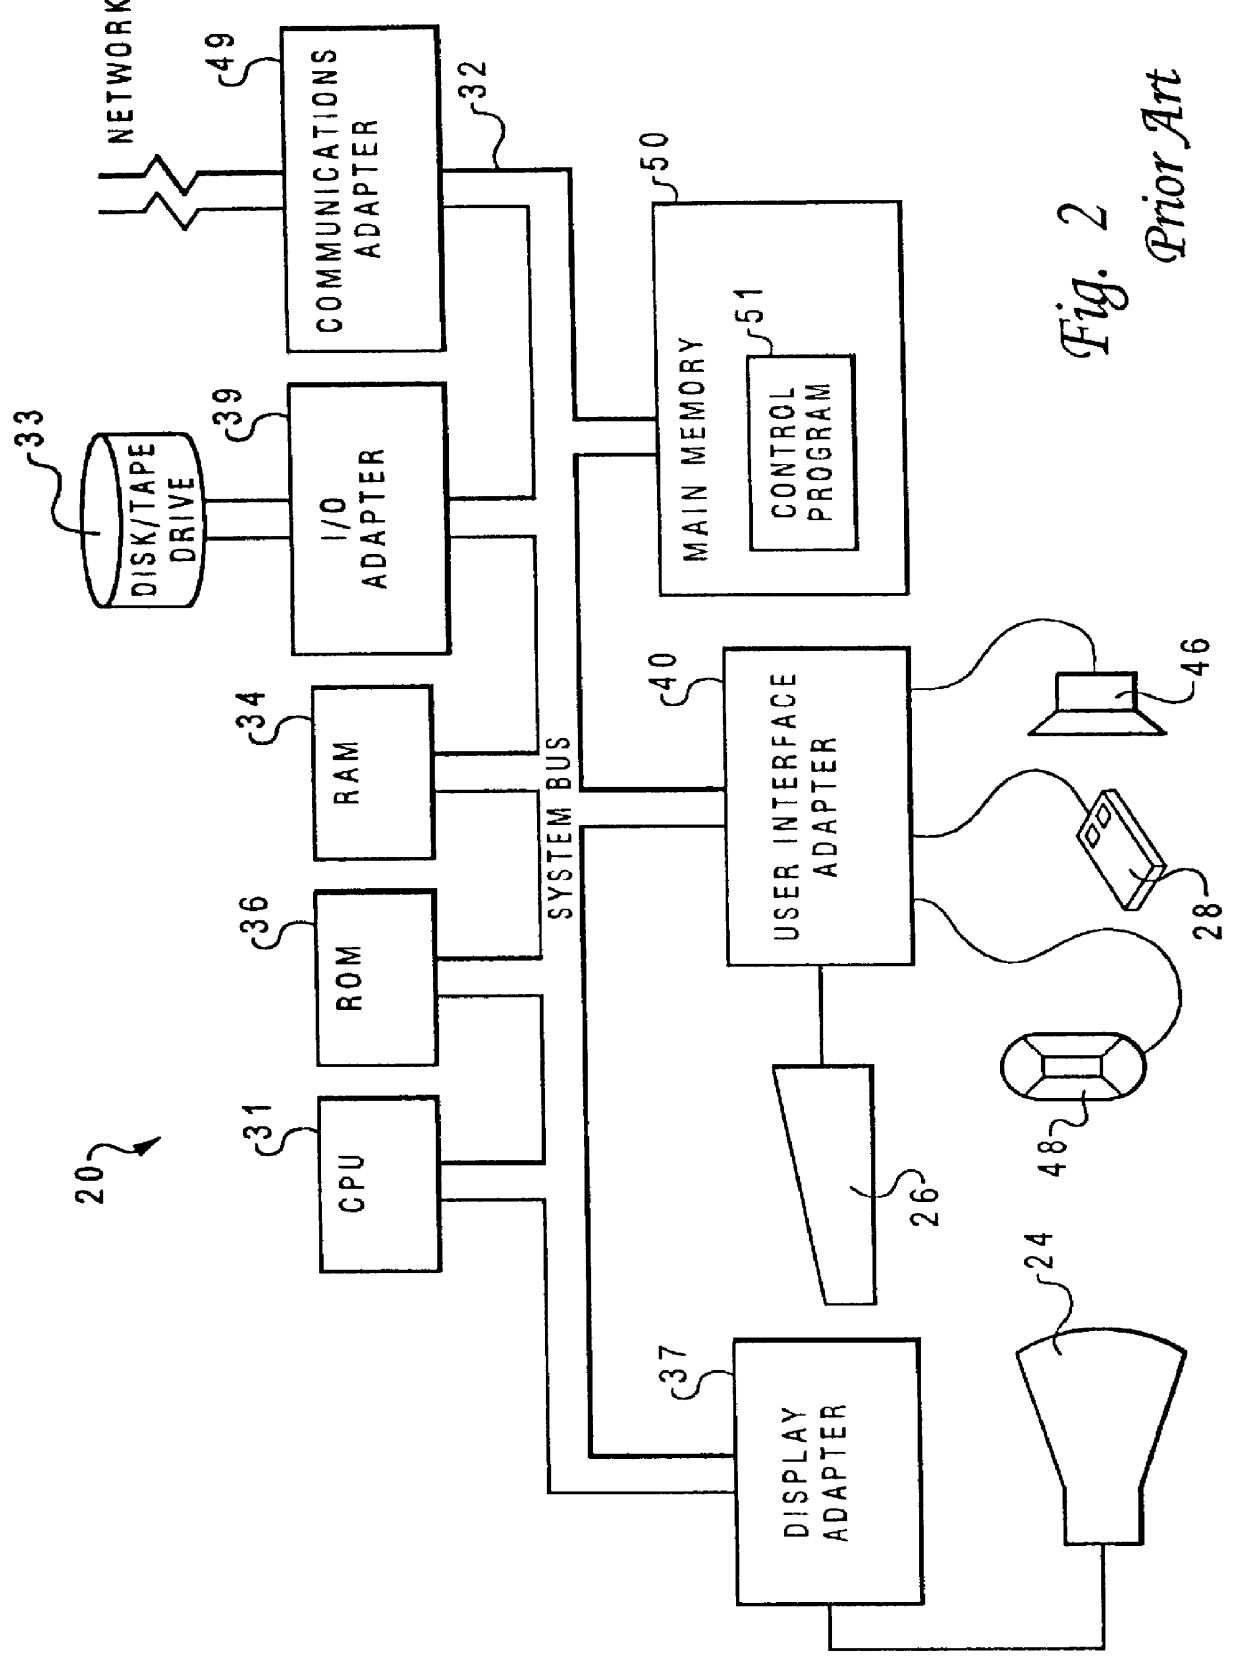 Method and system for segmenting wires prior to buffer insertion